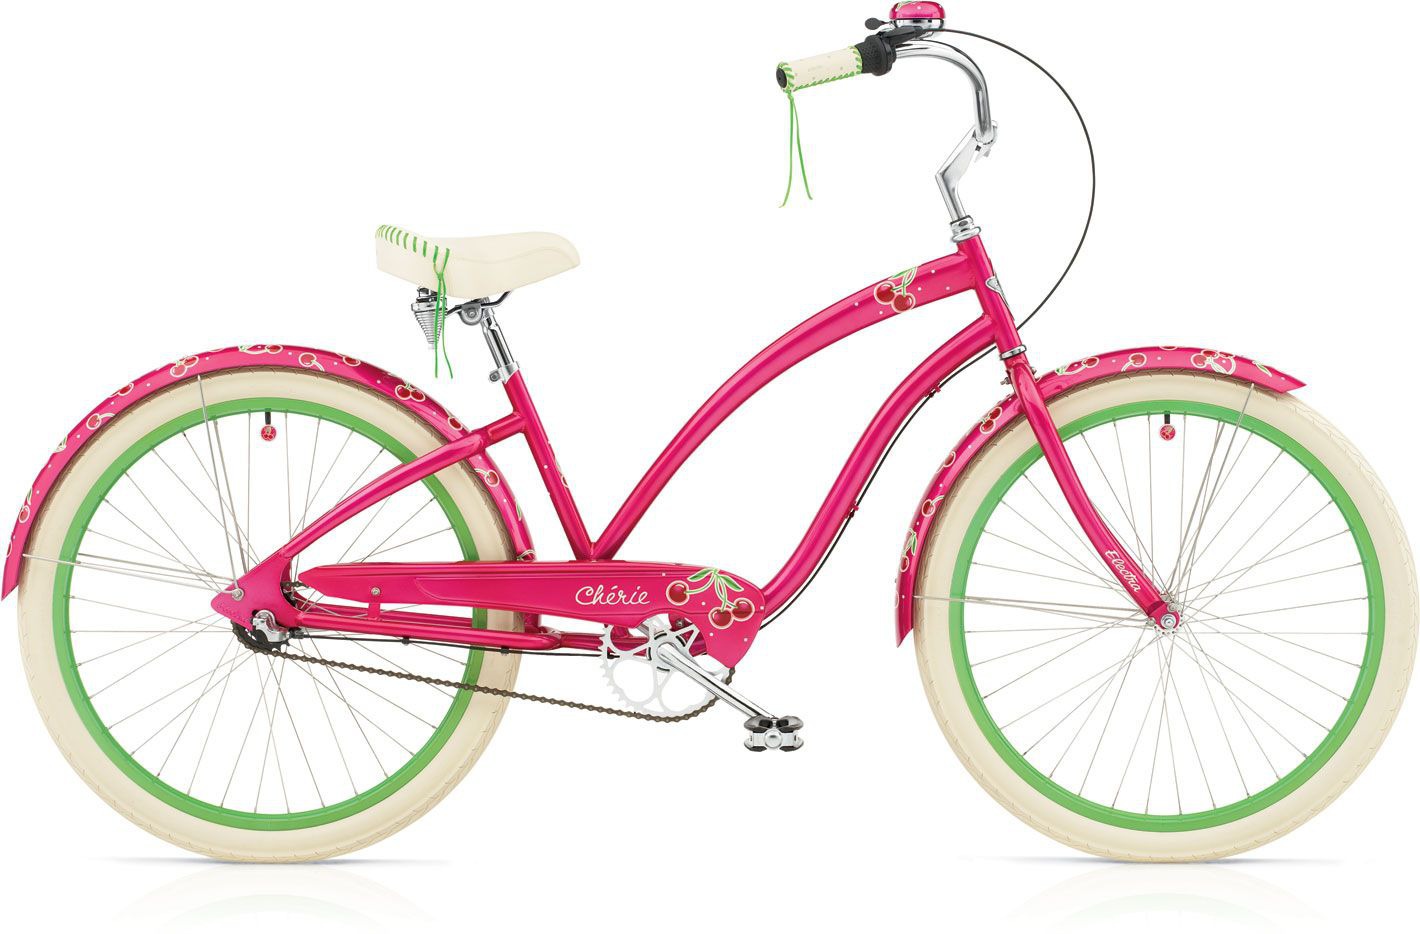 2011 Electra Cherie 3i - Bicycle 